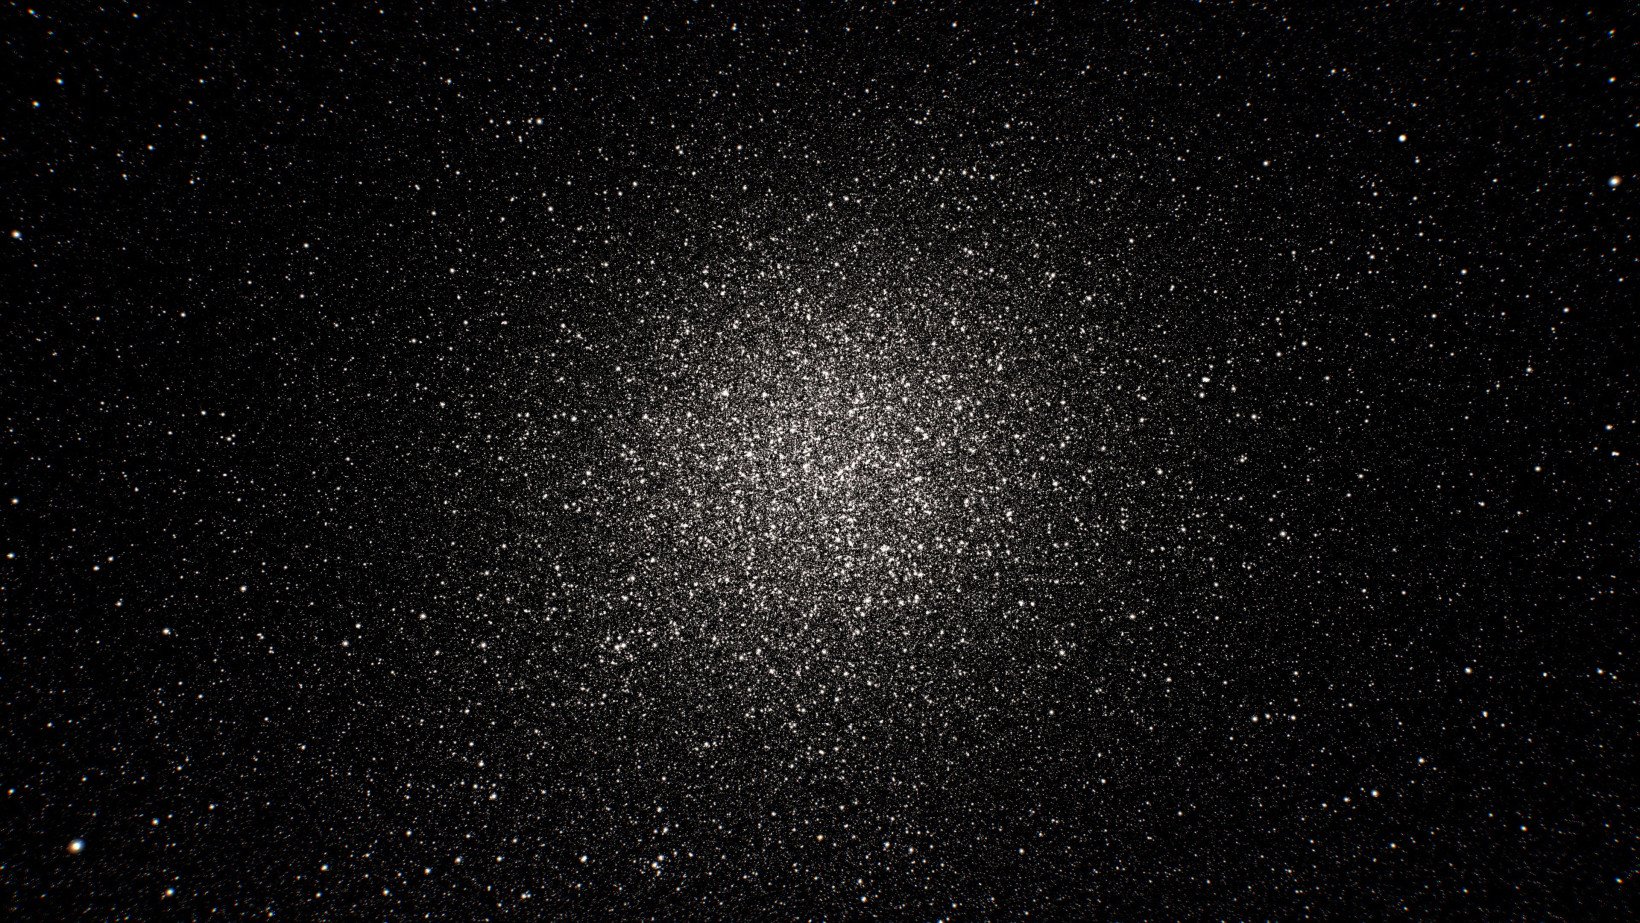 This image shows a star cluster set against a dark background. The further in towards the cluster’s centre, the higher the density of stars.